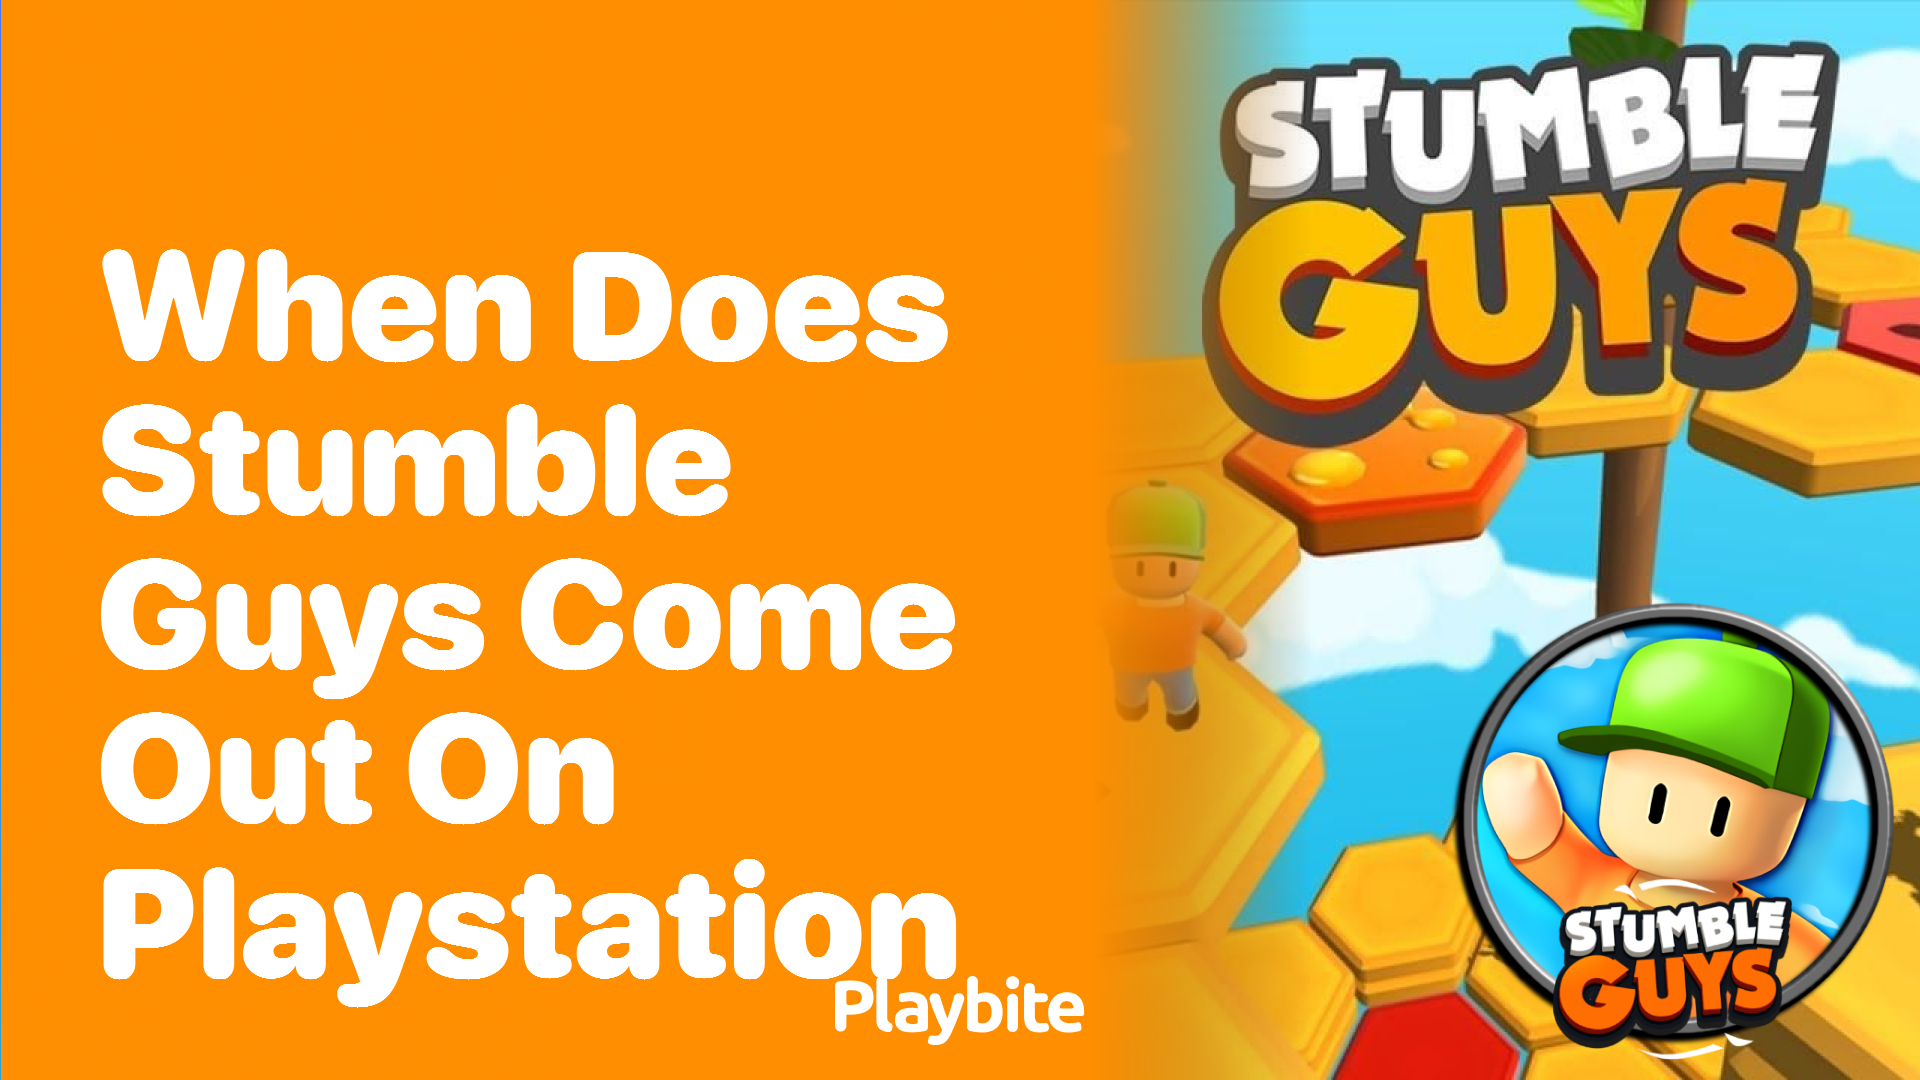 When Does Stumble Guys Come Out on PlayStation?